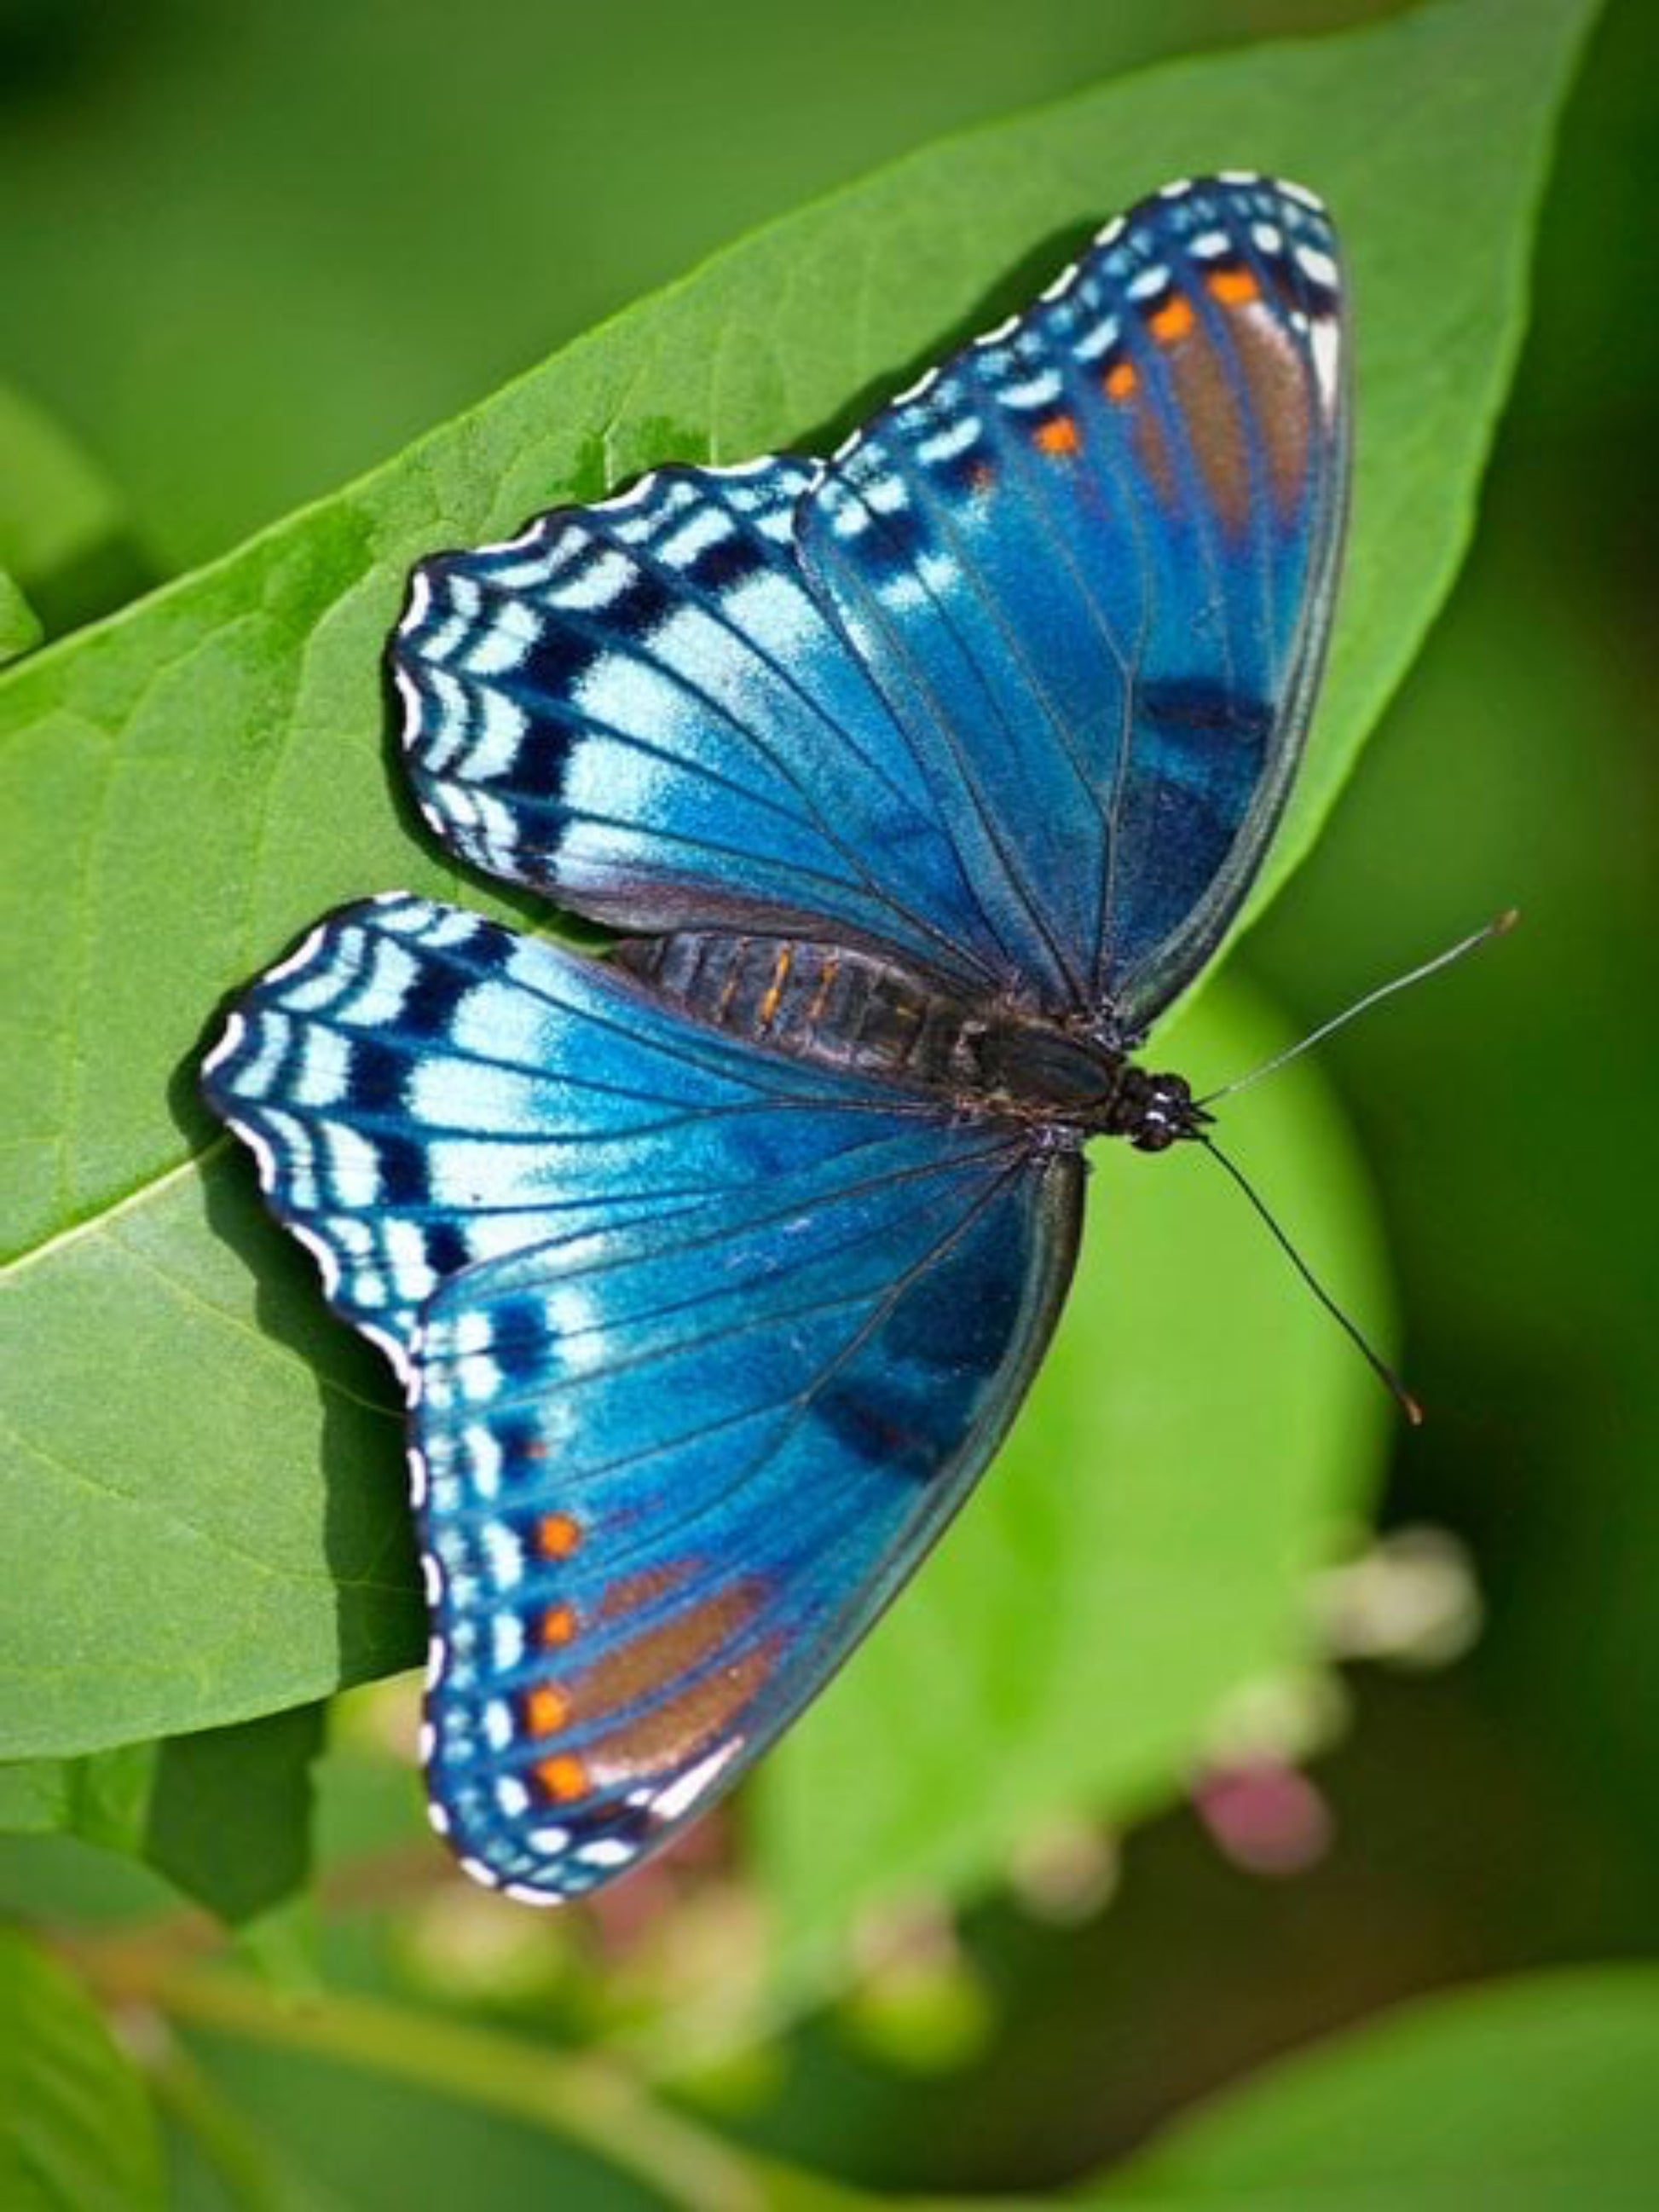 red spotted purple butterfly on his host plant " American plum"